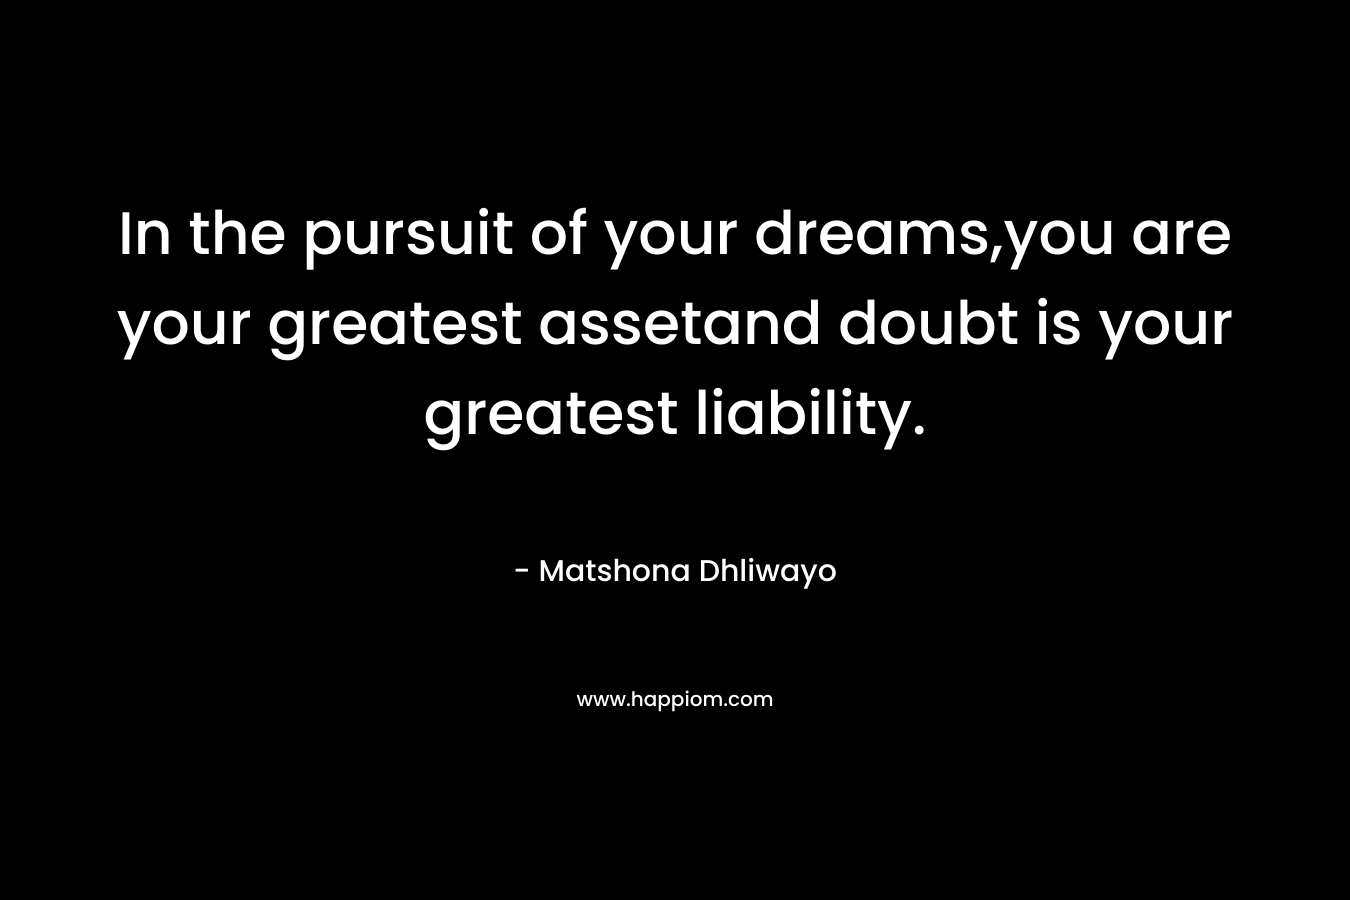 In the pursuit of your dreams,you are your greatest assetand doubt is your greatest liability.